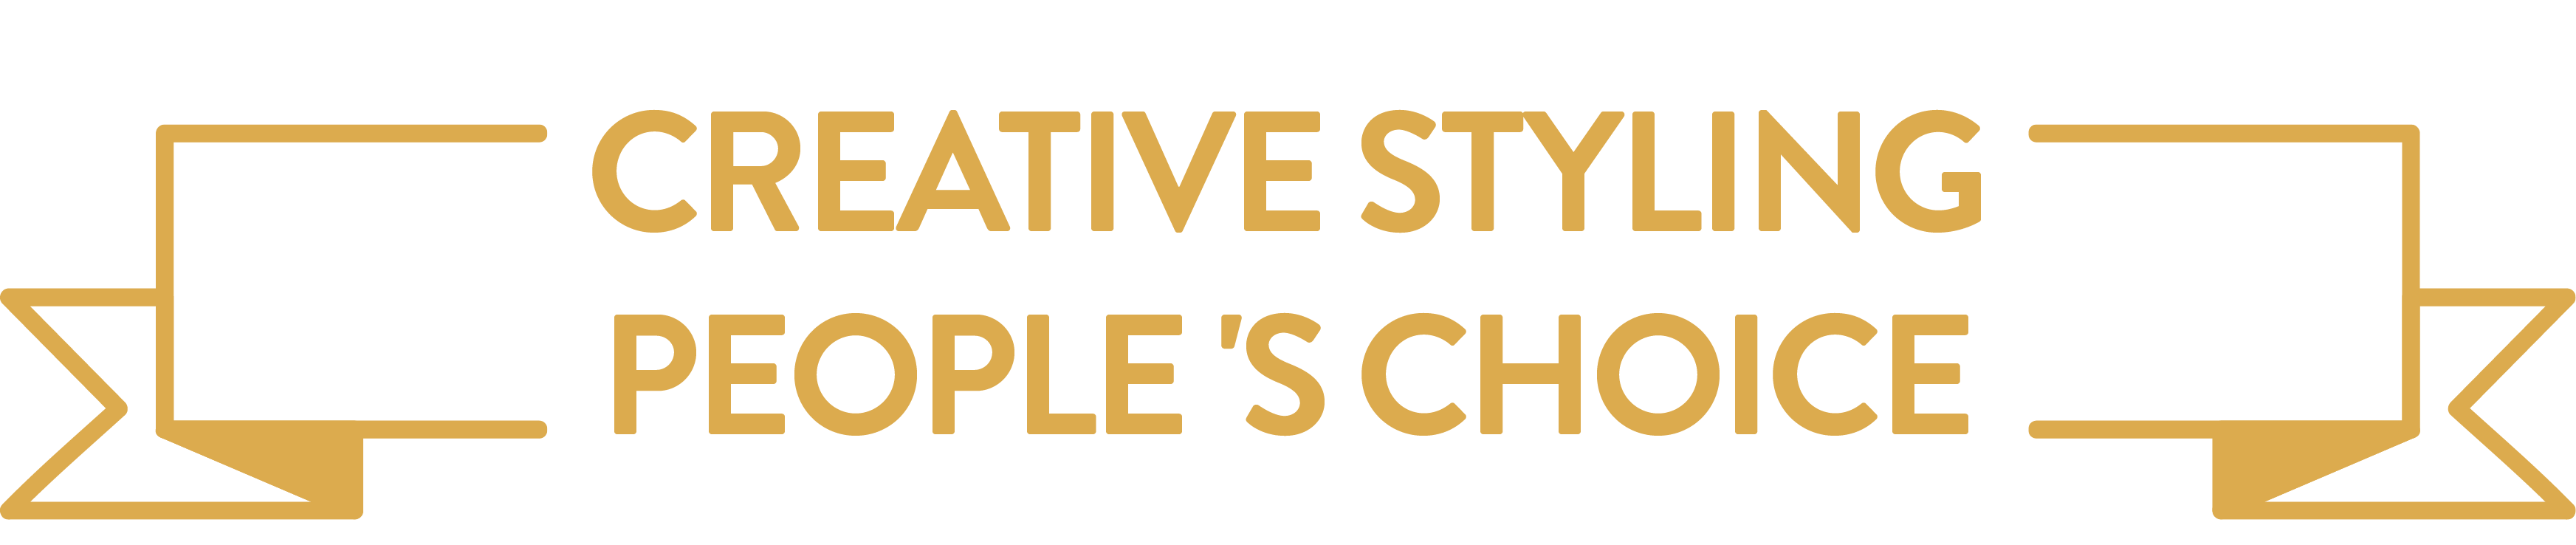 Creative Styling Banner